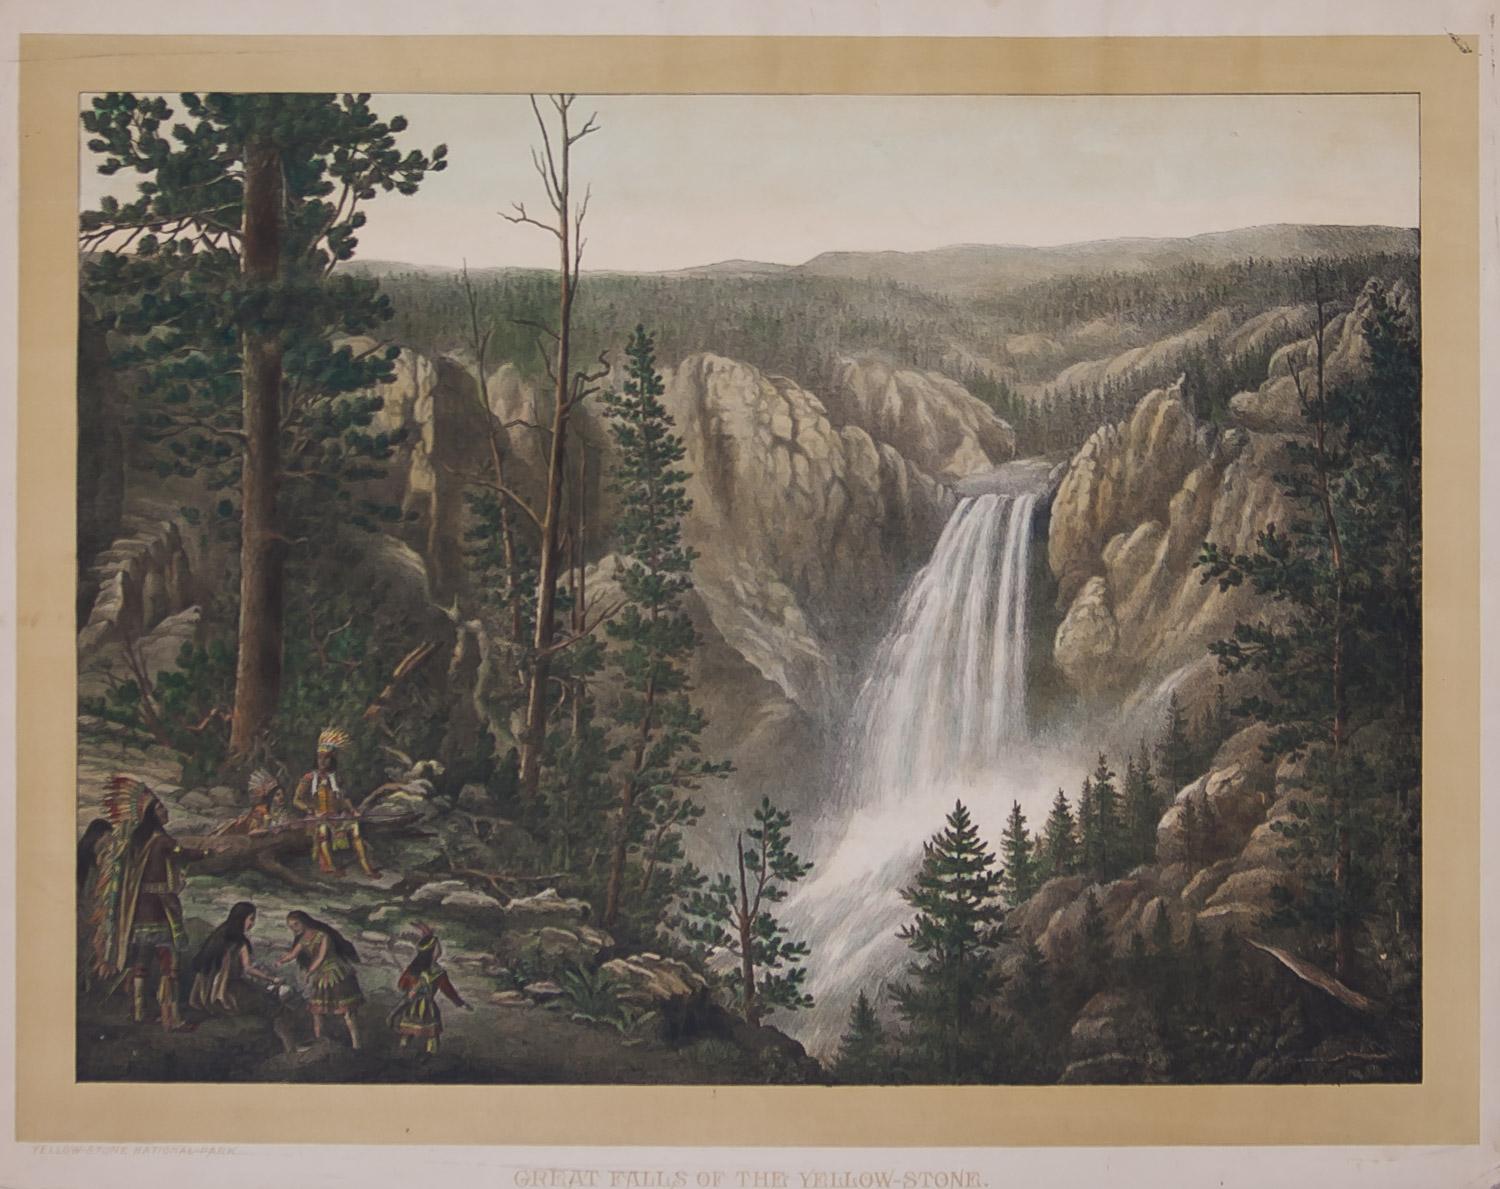 Unknown Landscape Print - Great Falls of the Yellow-Stone, Yellowstone National Park 1880